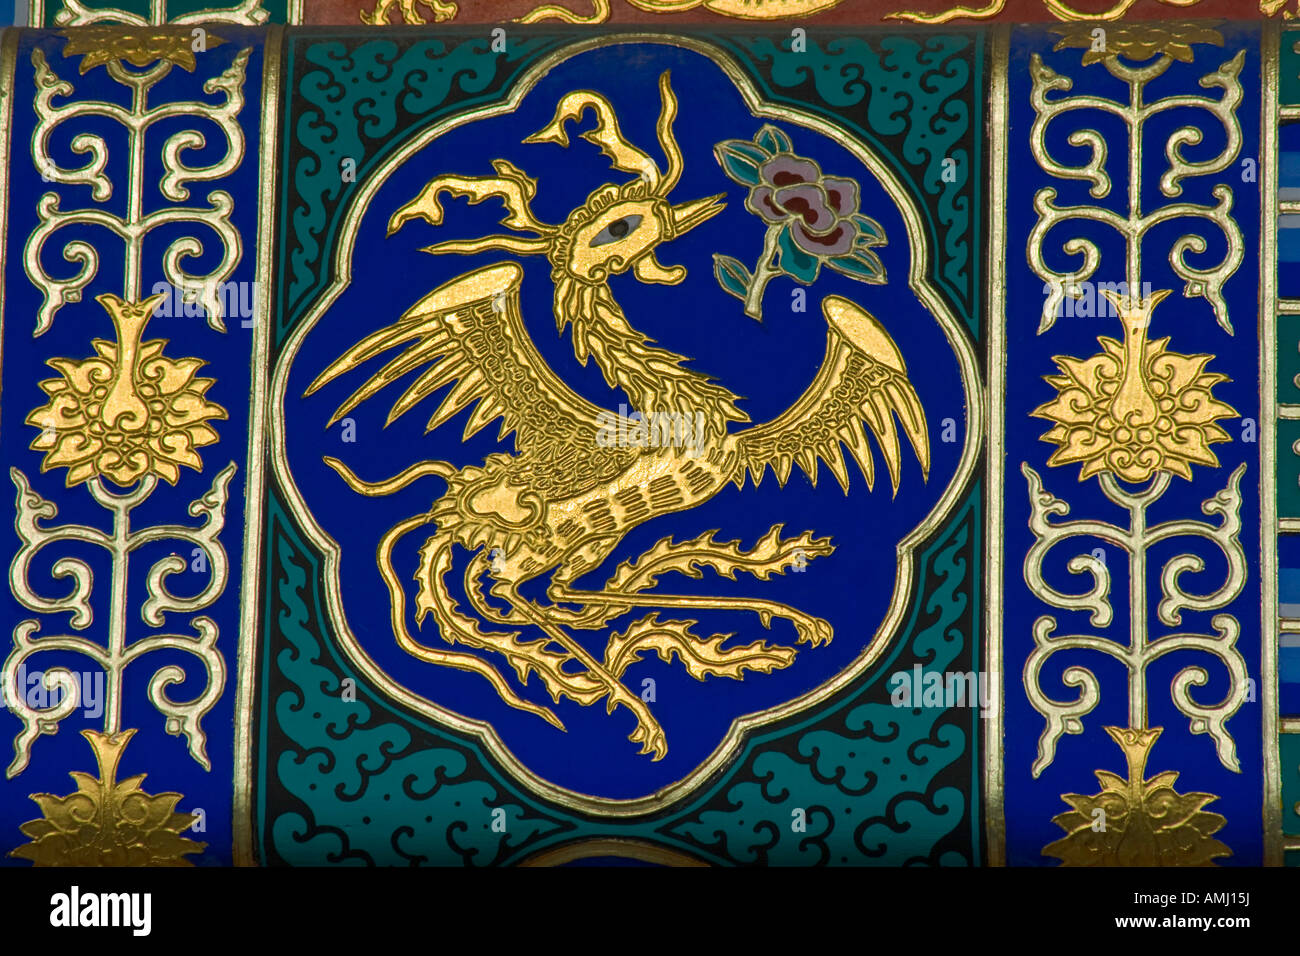 Ornate Phoenix Detail on the Temple of Heaven Beijing China Stock Photo